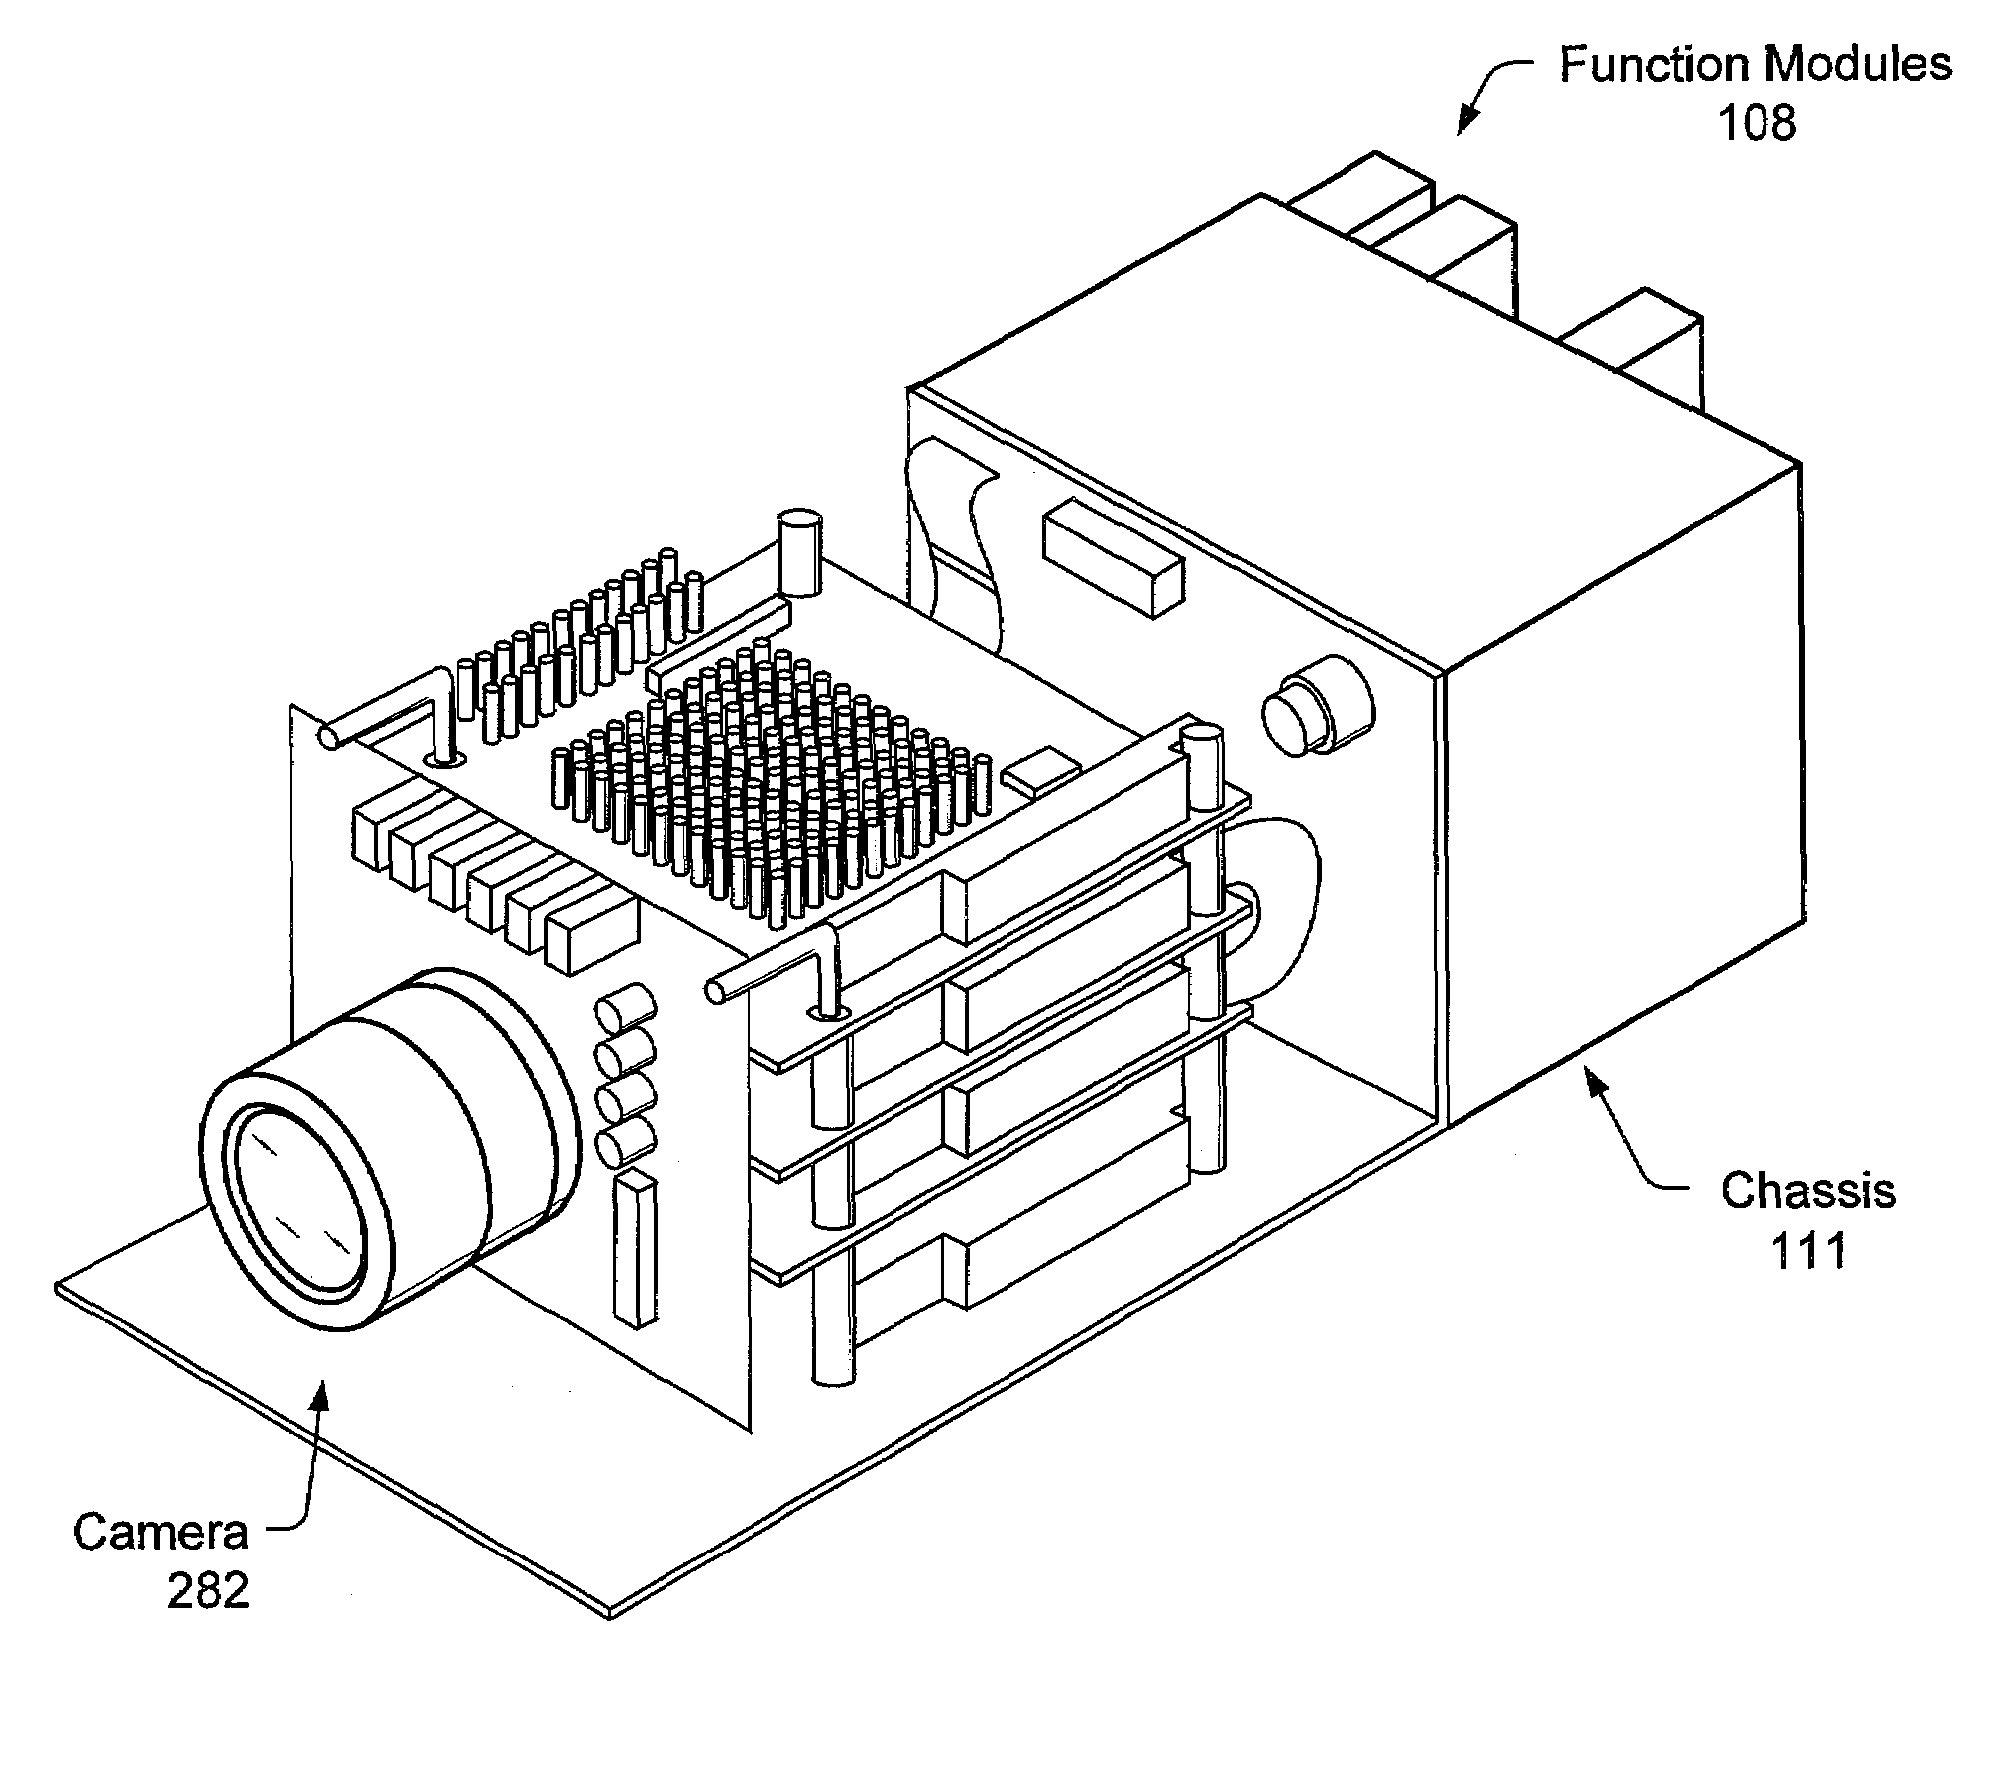 Smart camera with a plurality of slots for modular expansion capability through a variety of function modules connected to the smart camera